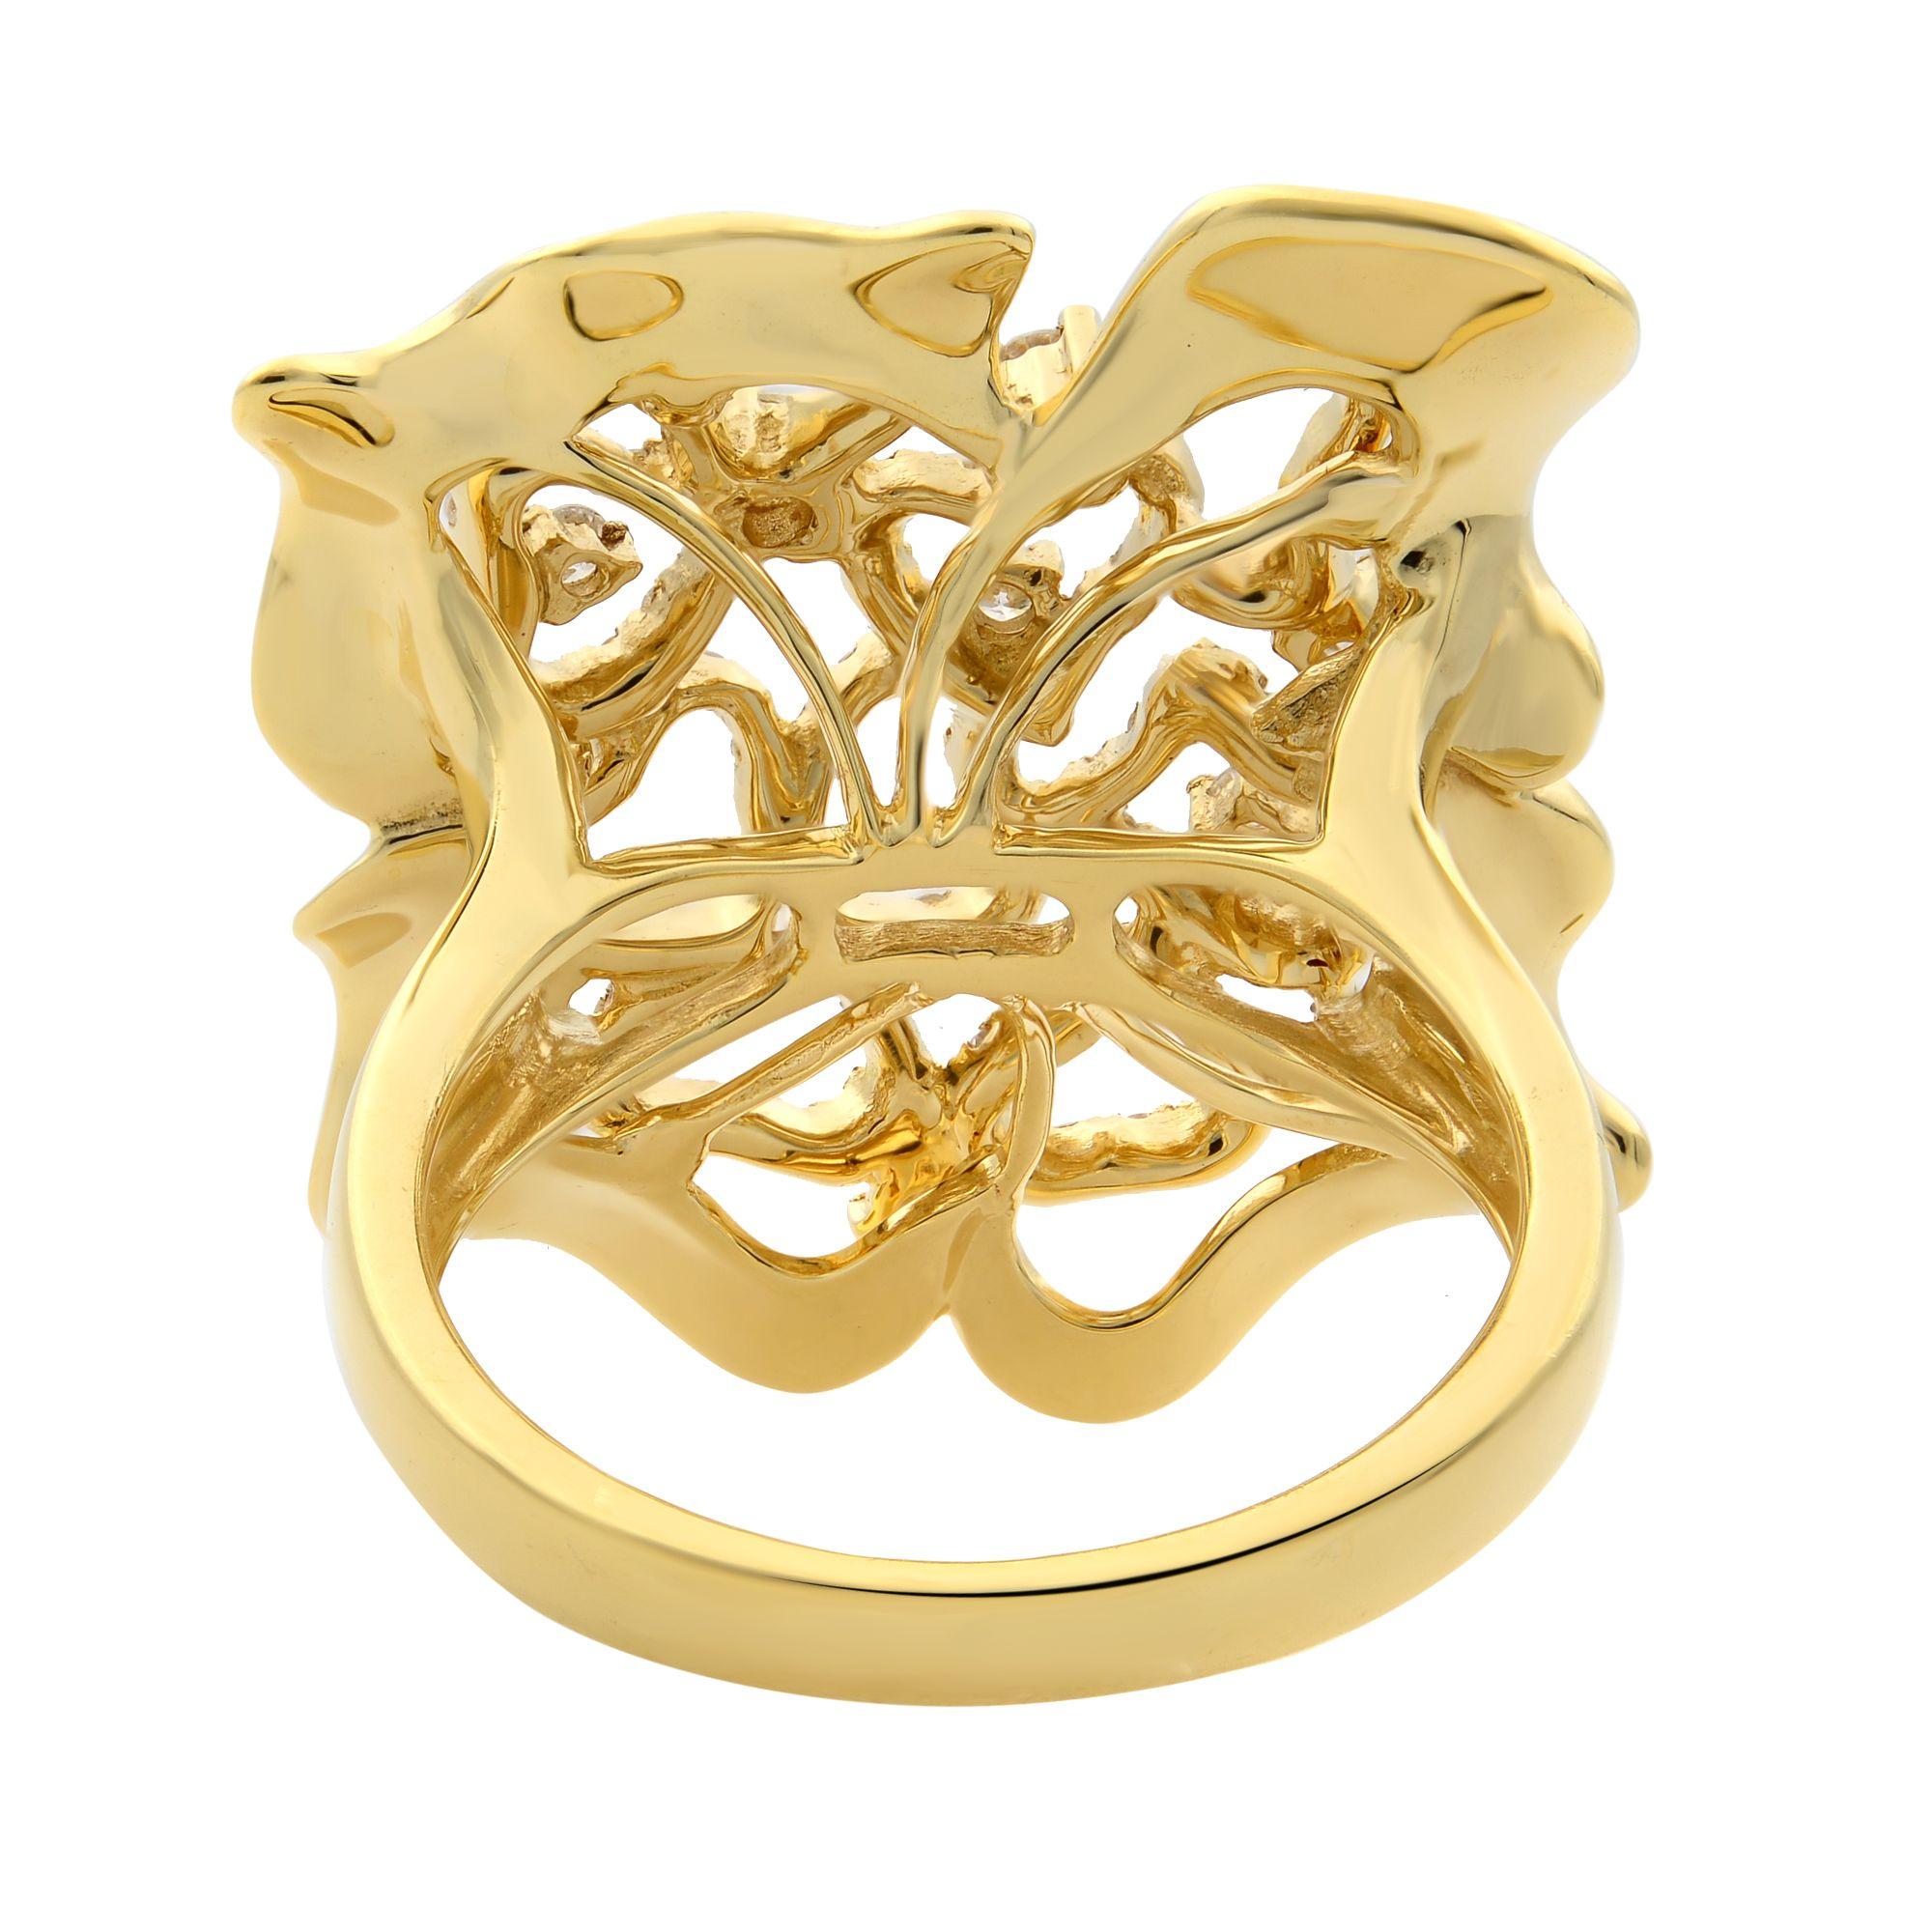 Rachel Koen Large Floral Diamond Cocktail Ring 18K Yellow Gold 0.75cttw In Excellent Condition For Sale In New York, NY